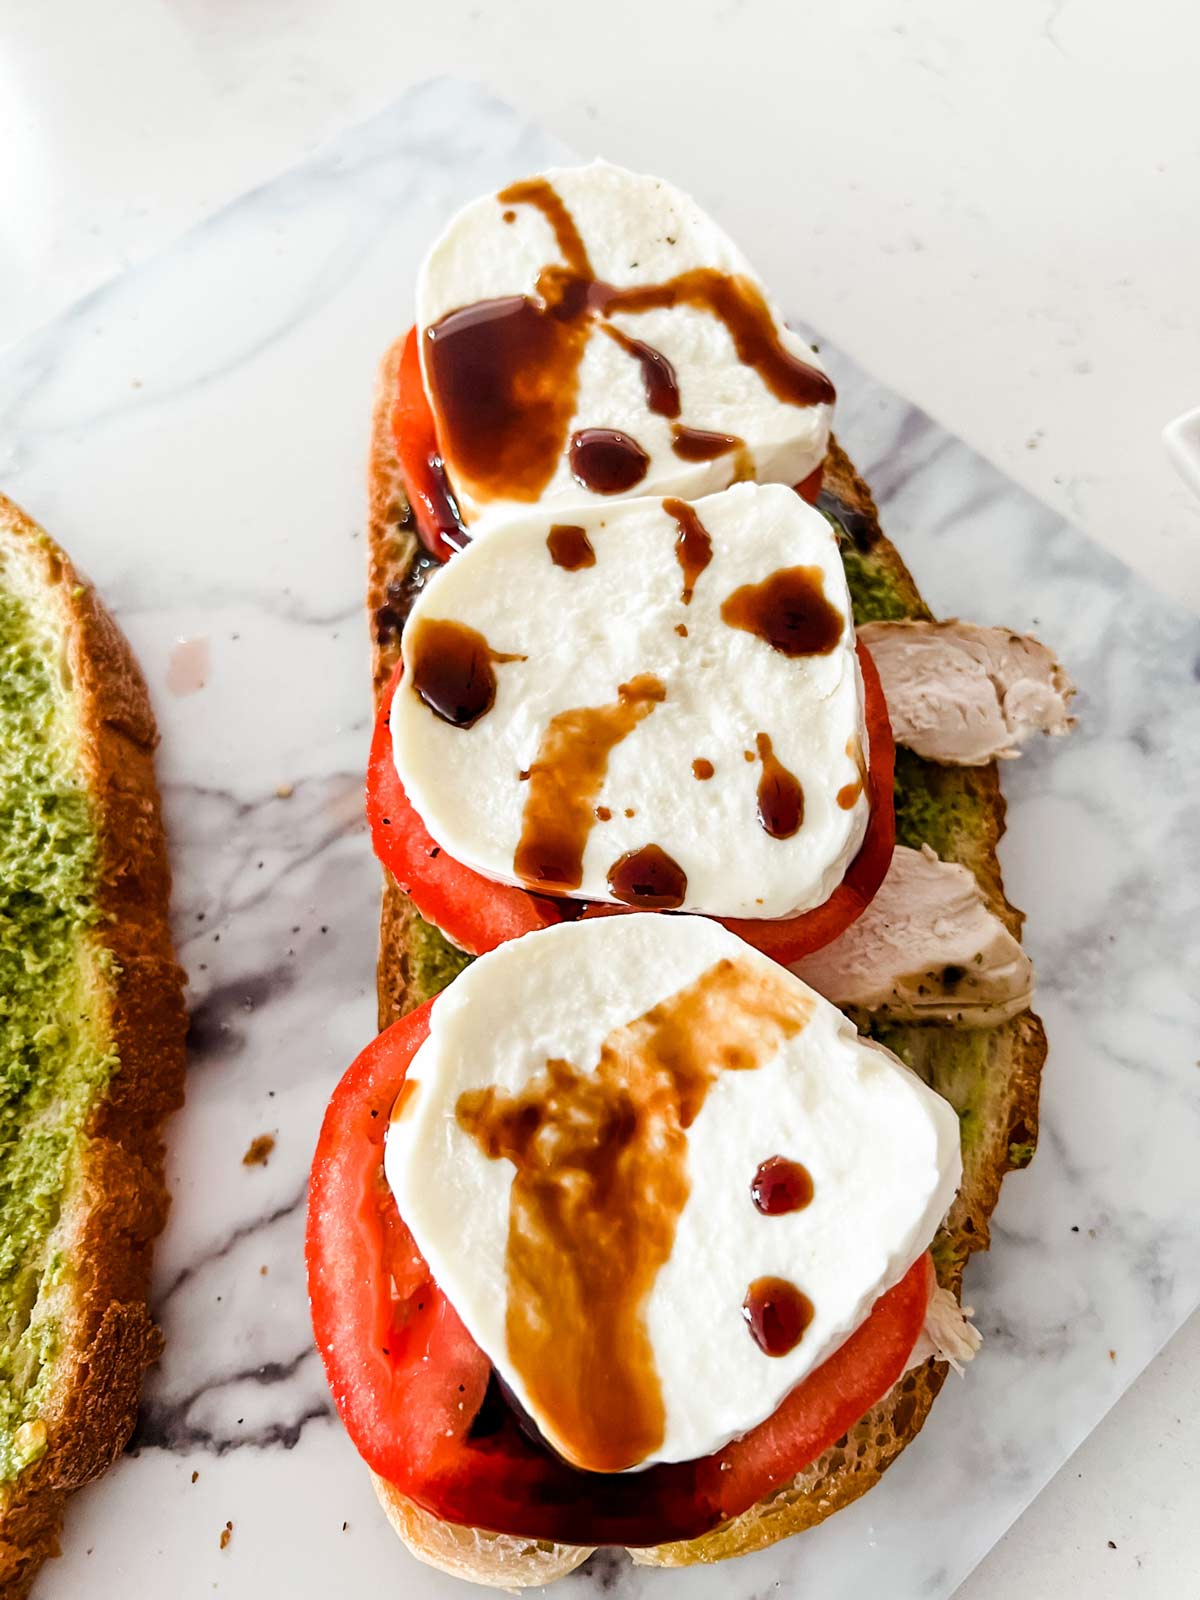 Reduced balsamic vinegar on top of fresh mozzarella on a piece of bread.